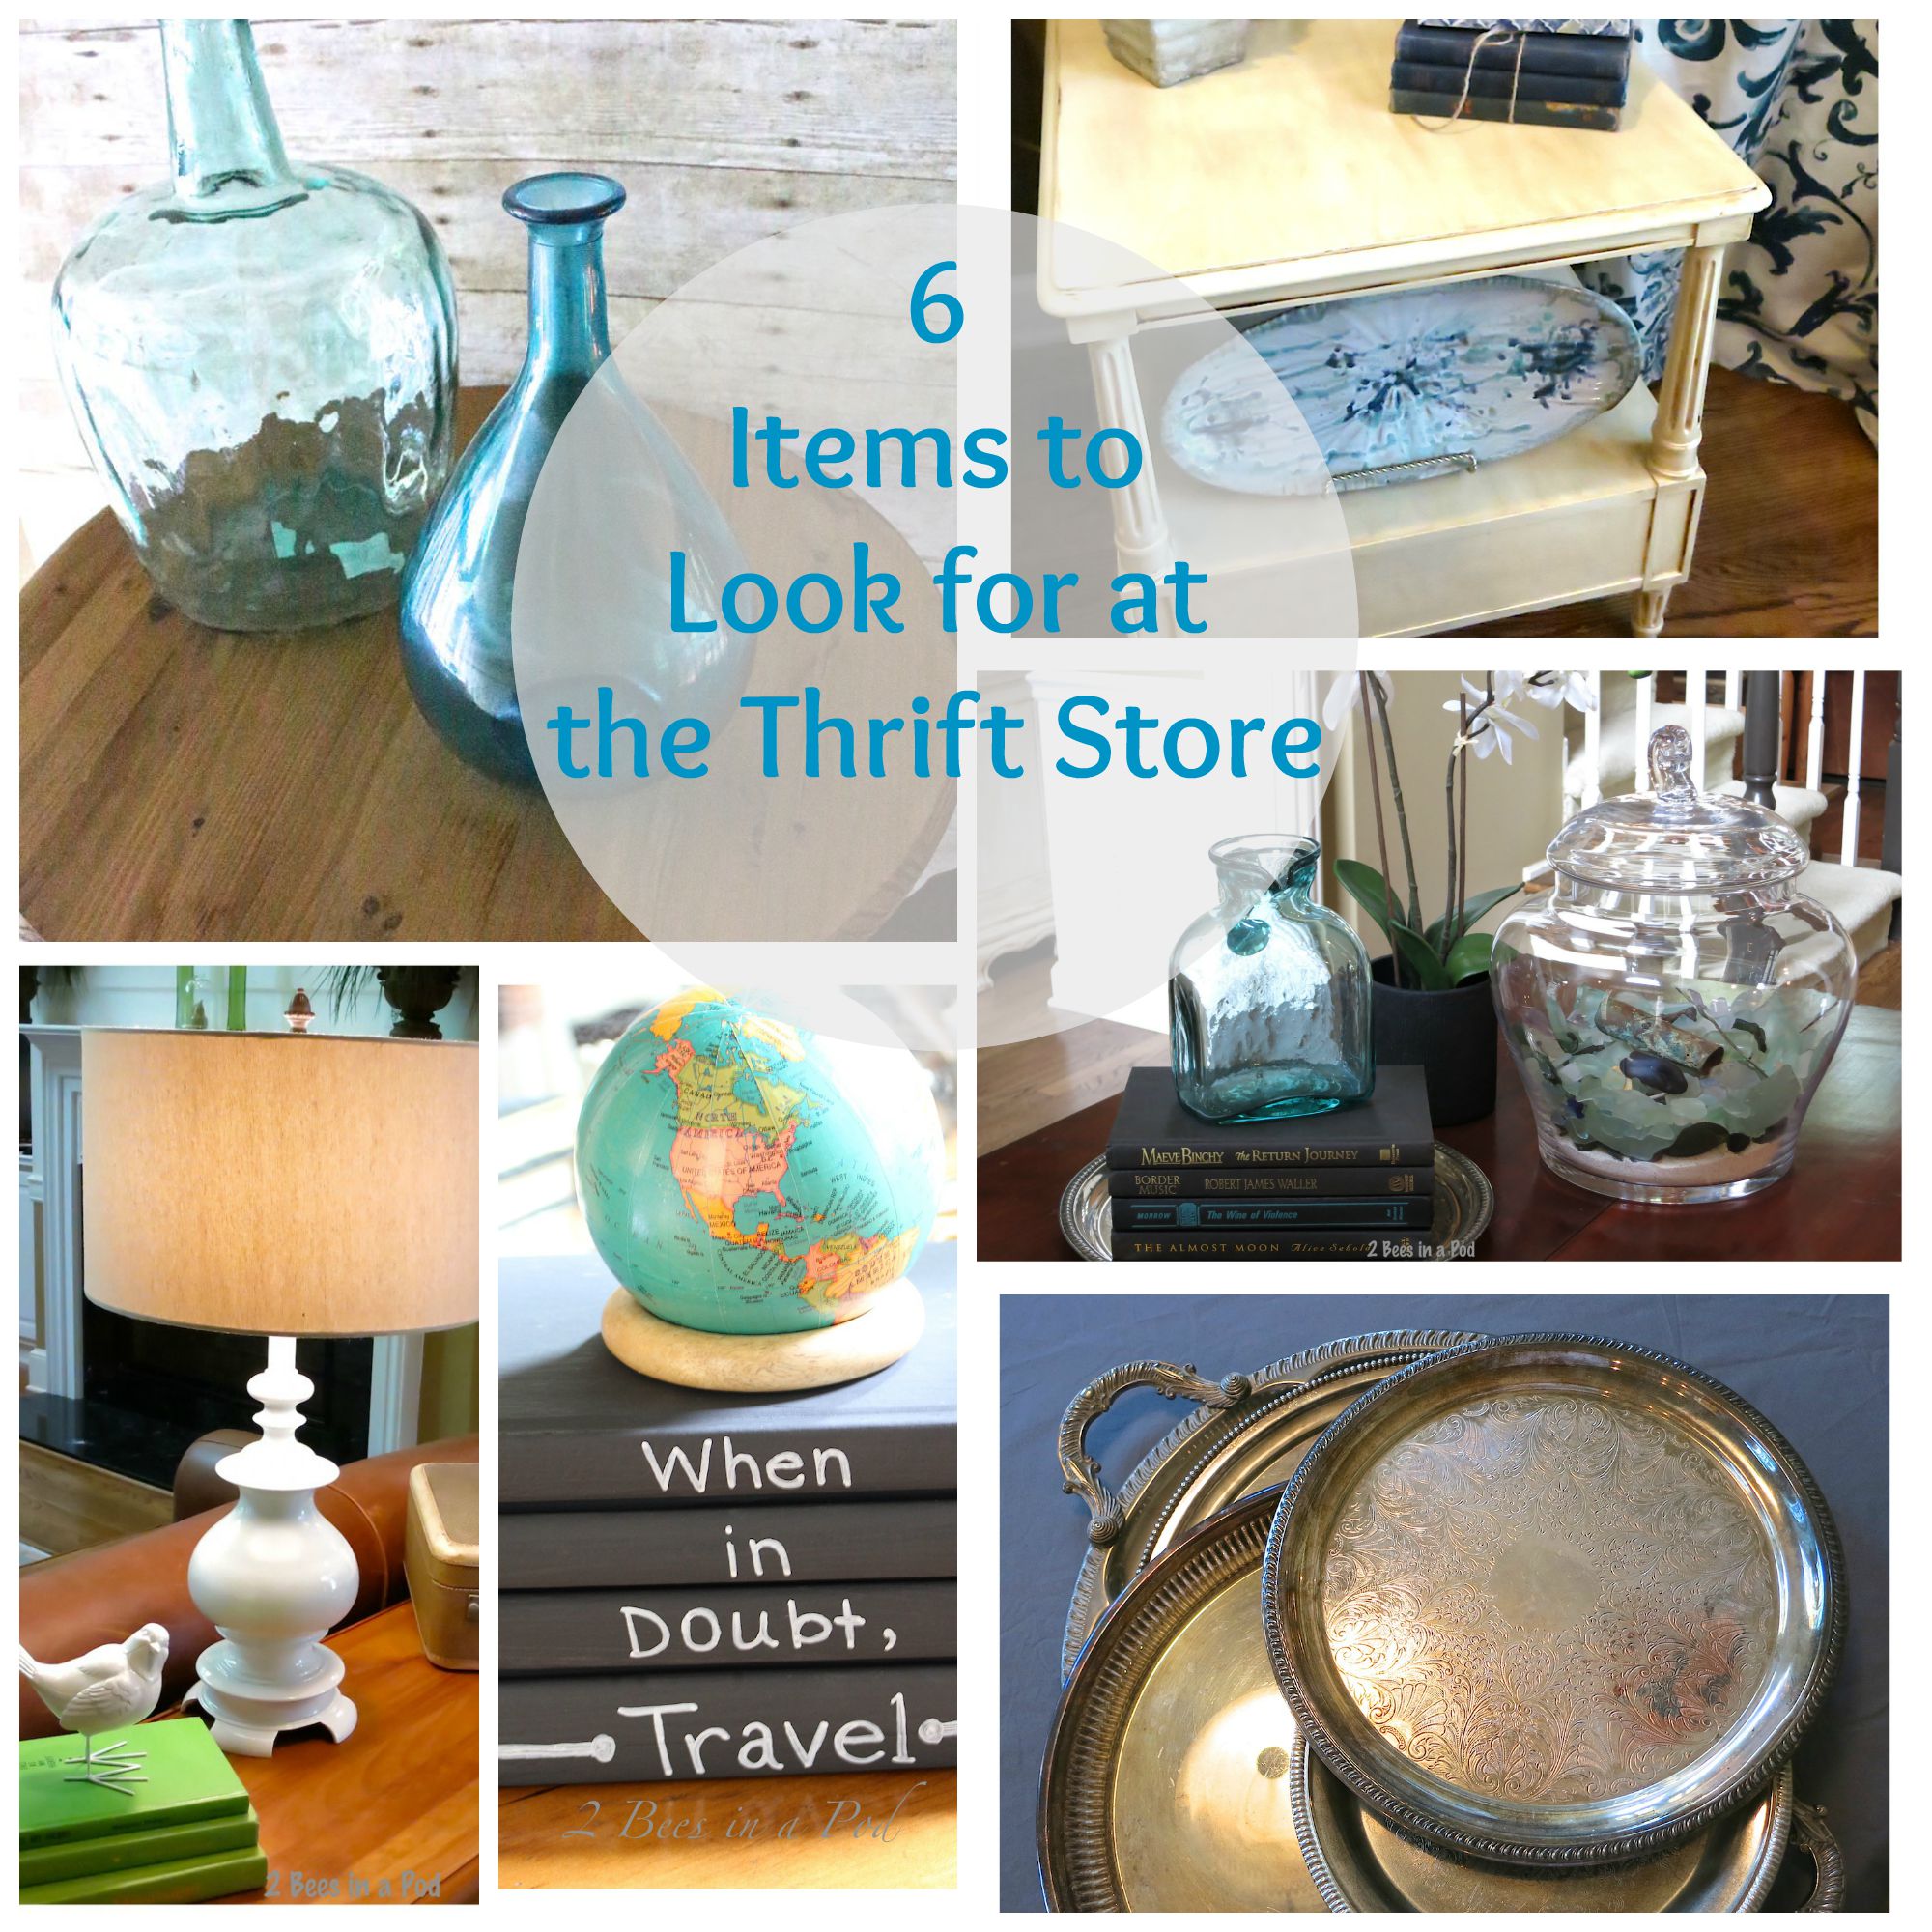 6 items to look for at the thrift store.